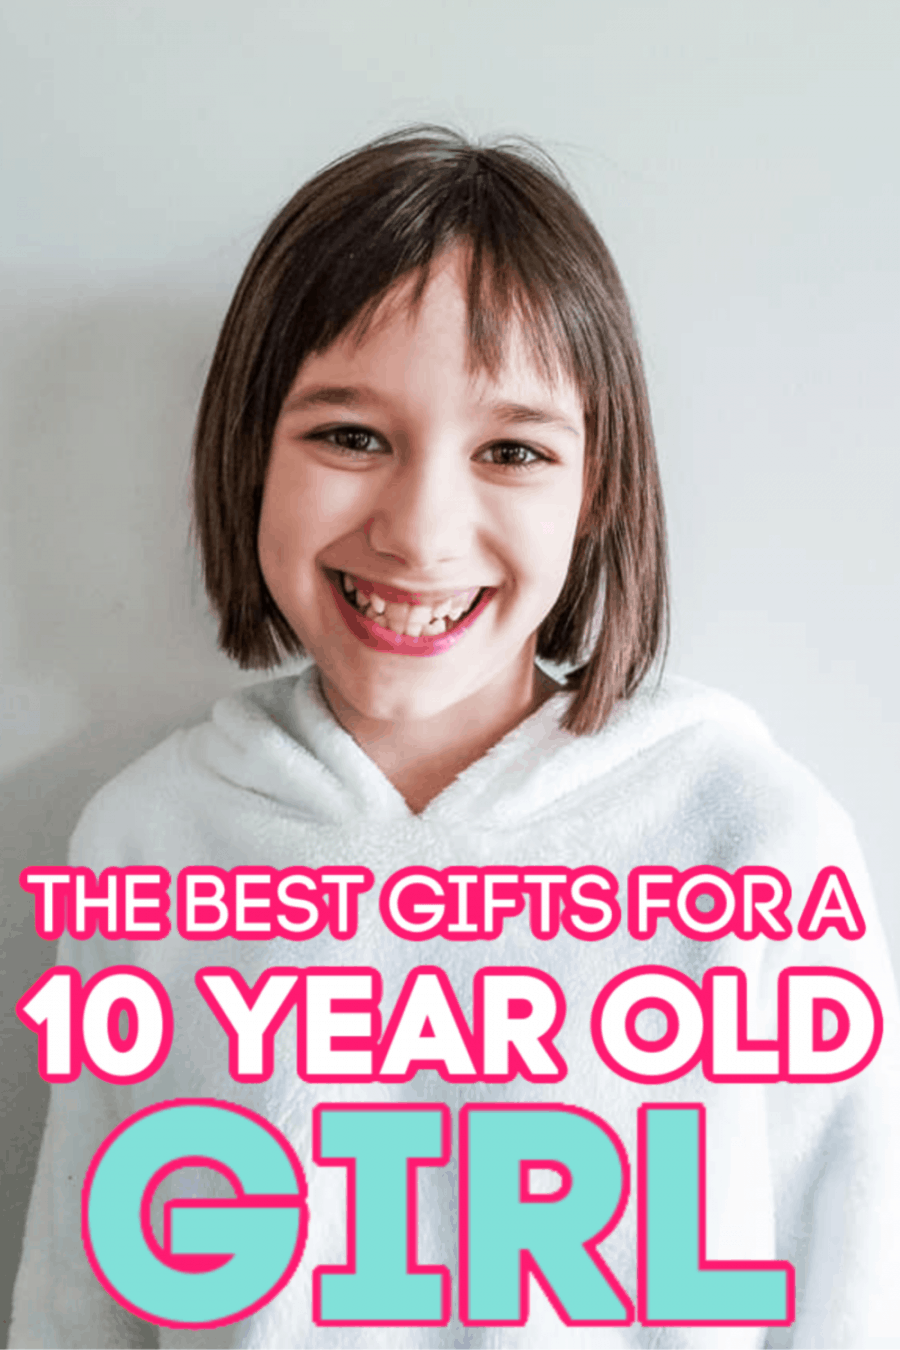 https://thriftyniftymommy.com/wp-content/uploads/2020/04/Gifts-for-a-10-Year-Old-girl-900x1350.png